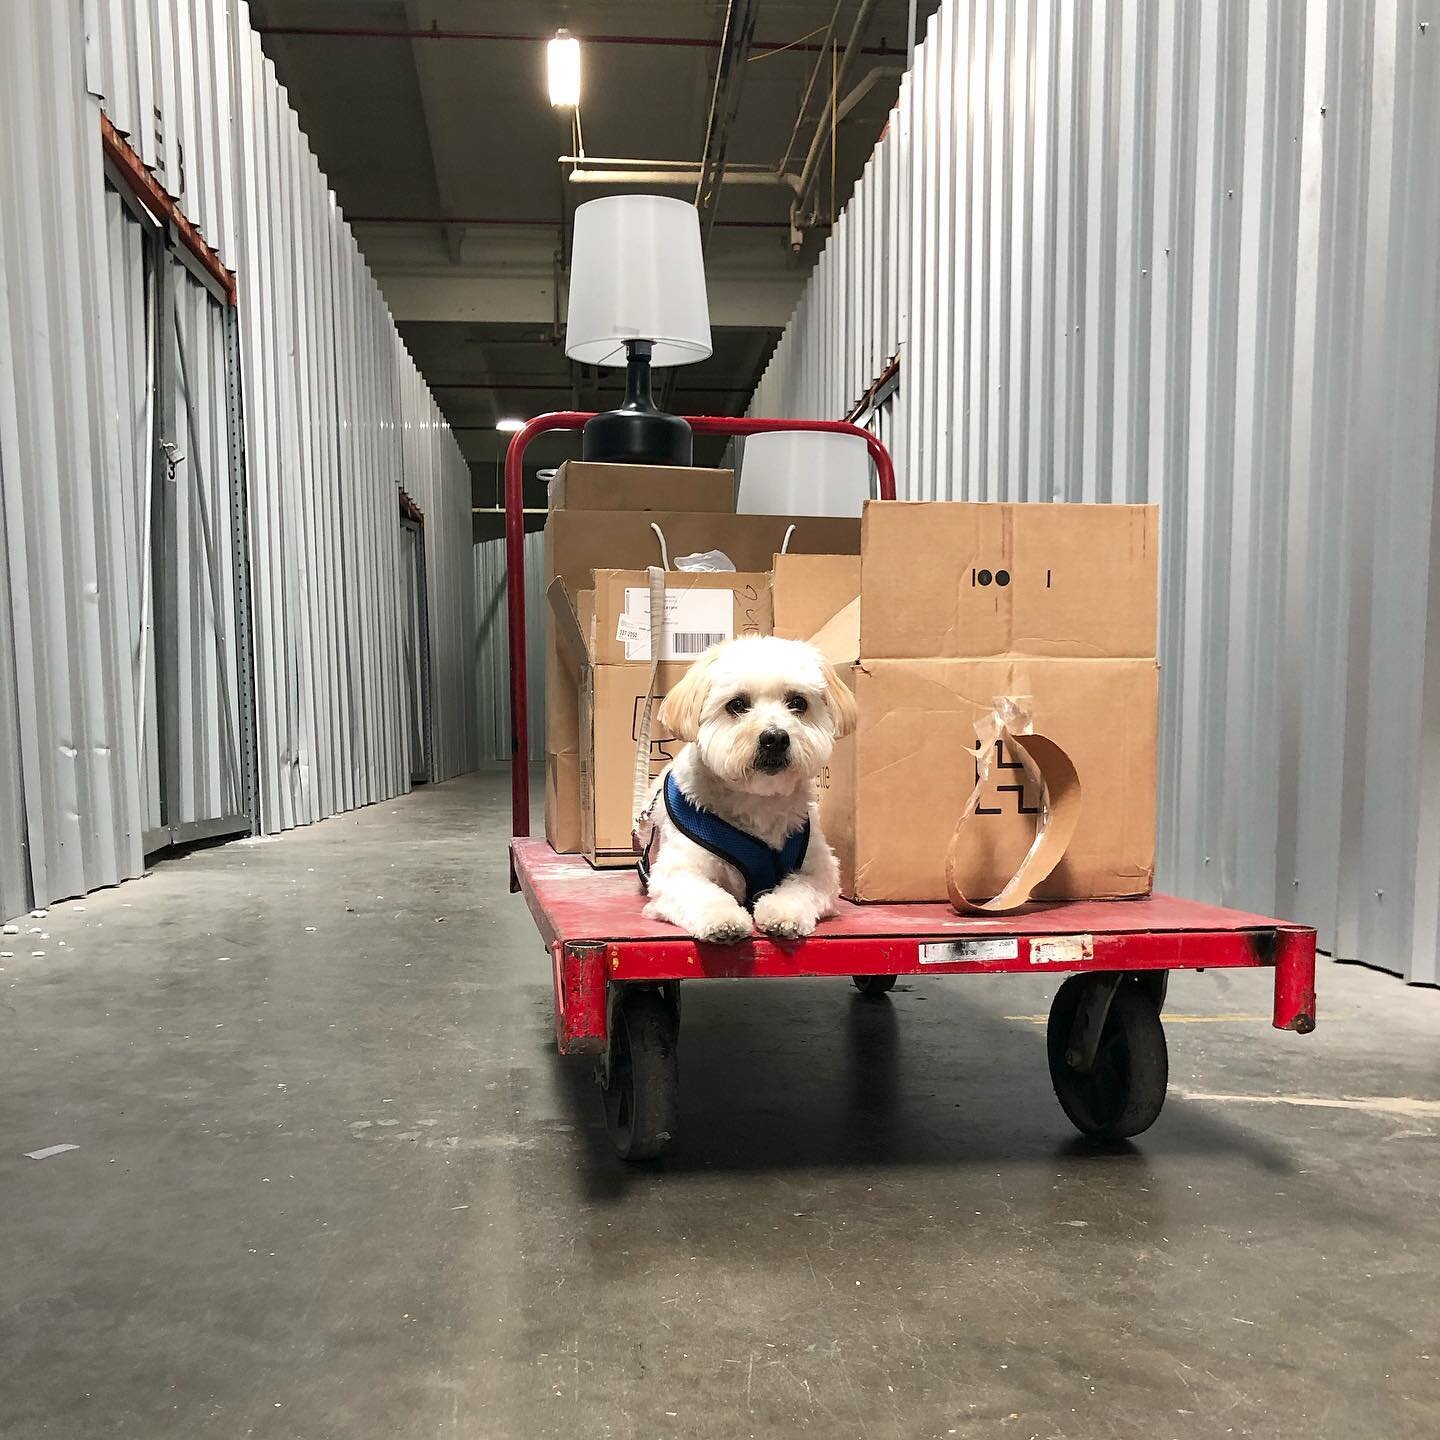 This is what it means to be the @visitbatch mascot: riding on the big carts while mom moves around 📦 on the weekends 
.
.
#packages #ridealong #workinghard #workinglikeadog #specialdelivery #coton #cotondog #cotonlove #cotonsofinstagram #cotondetule